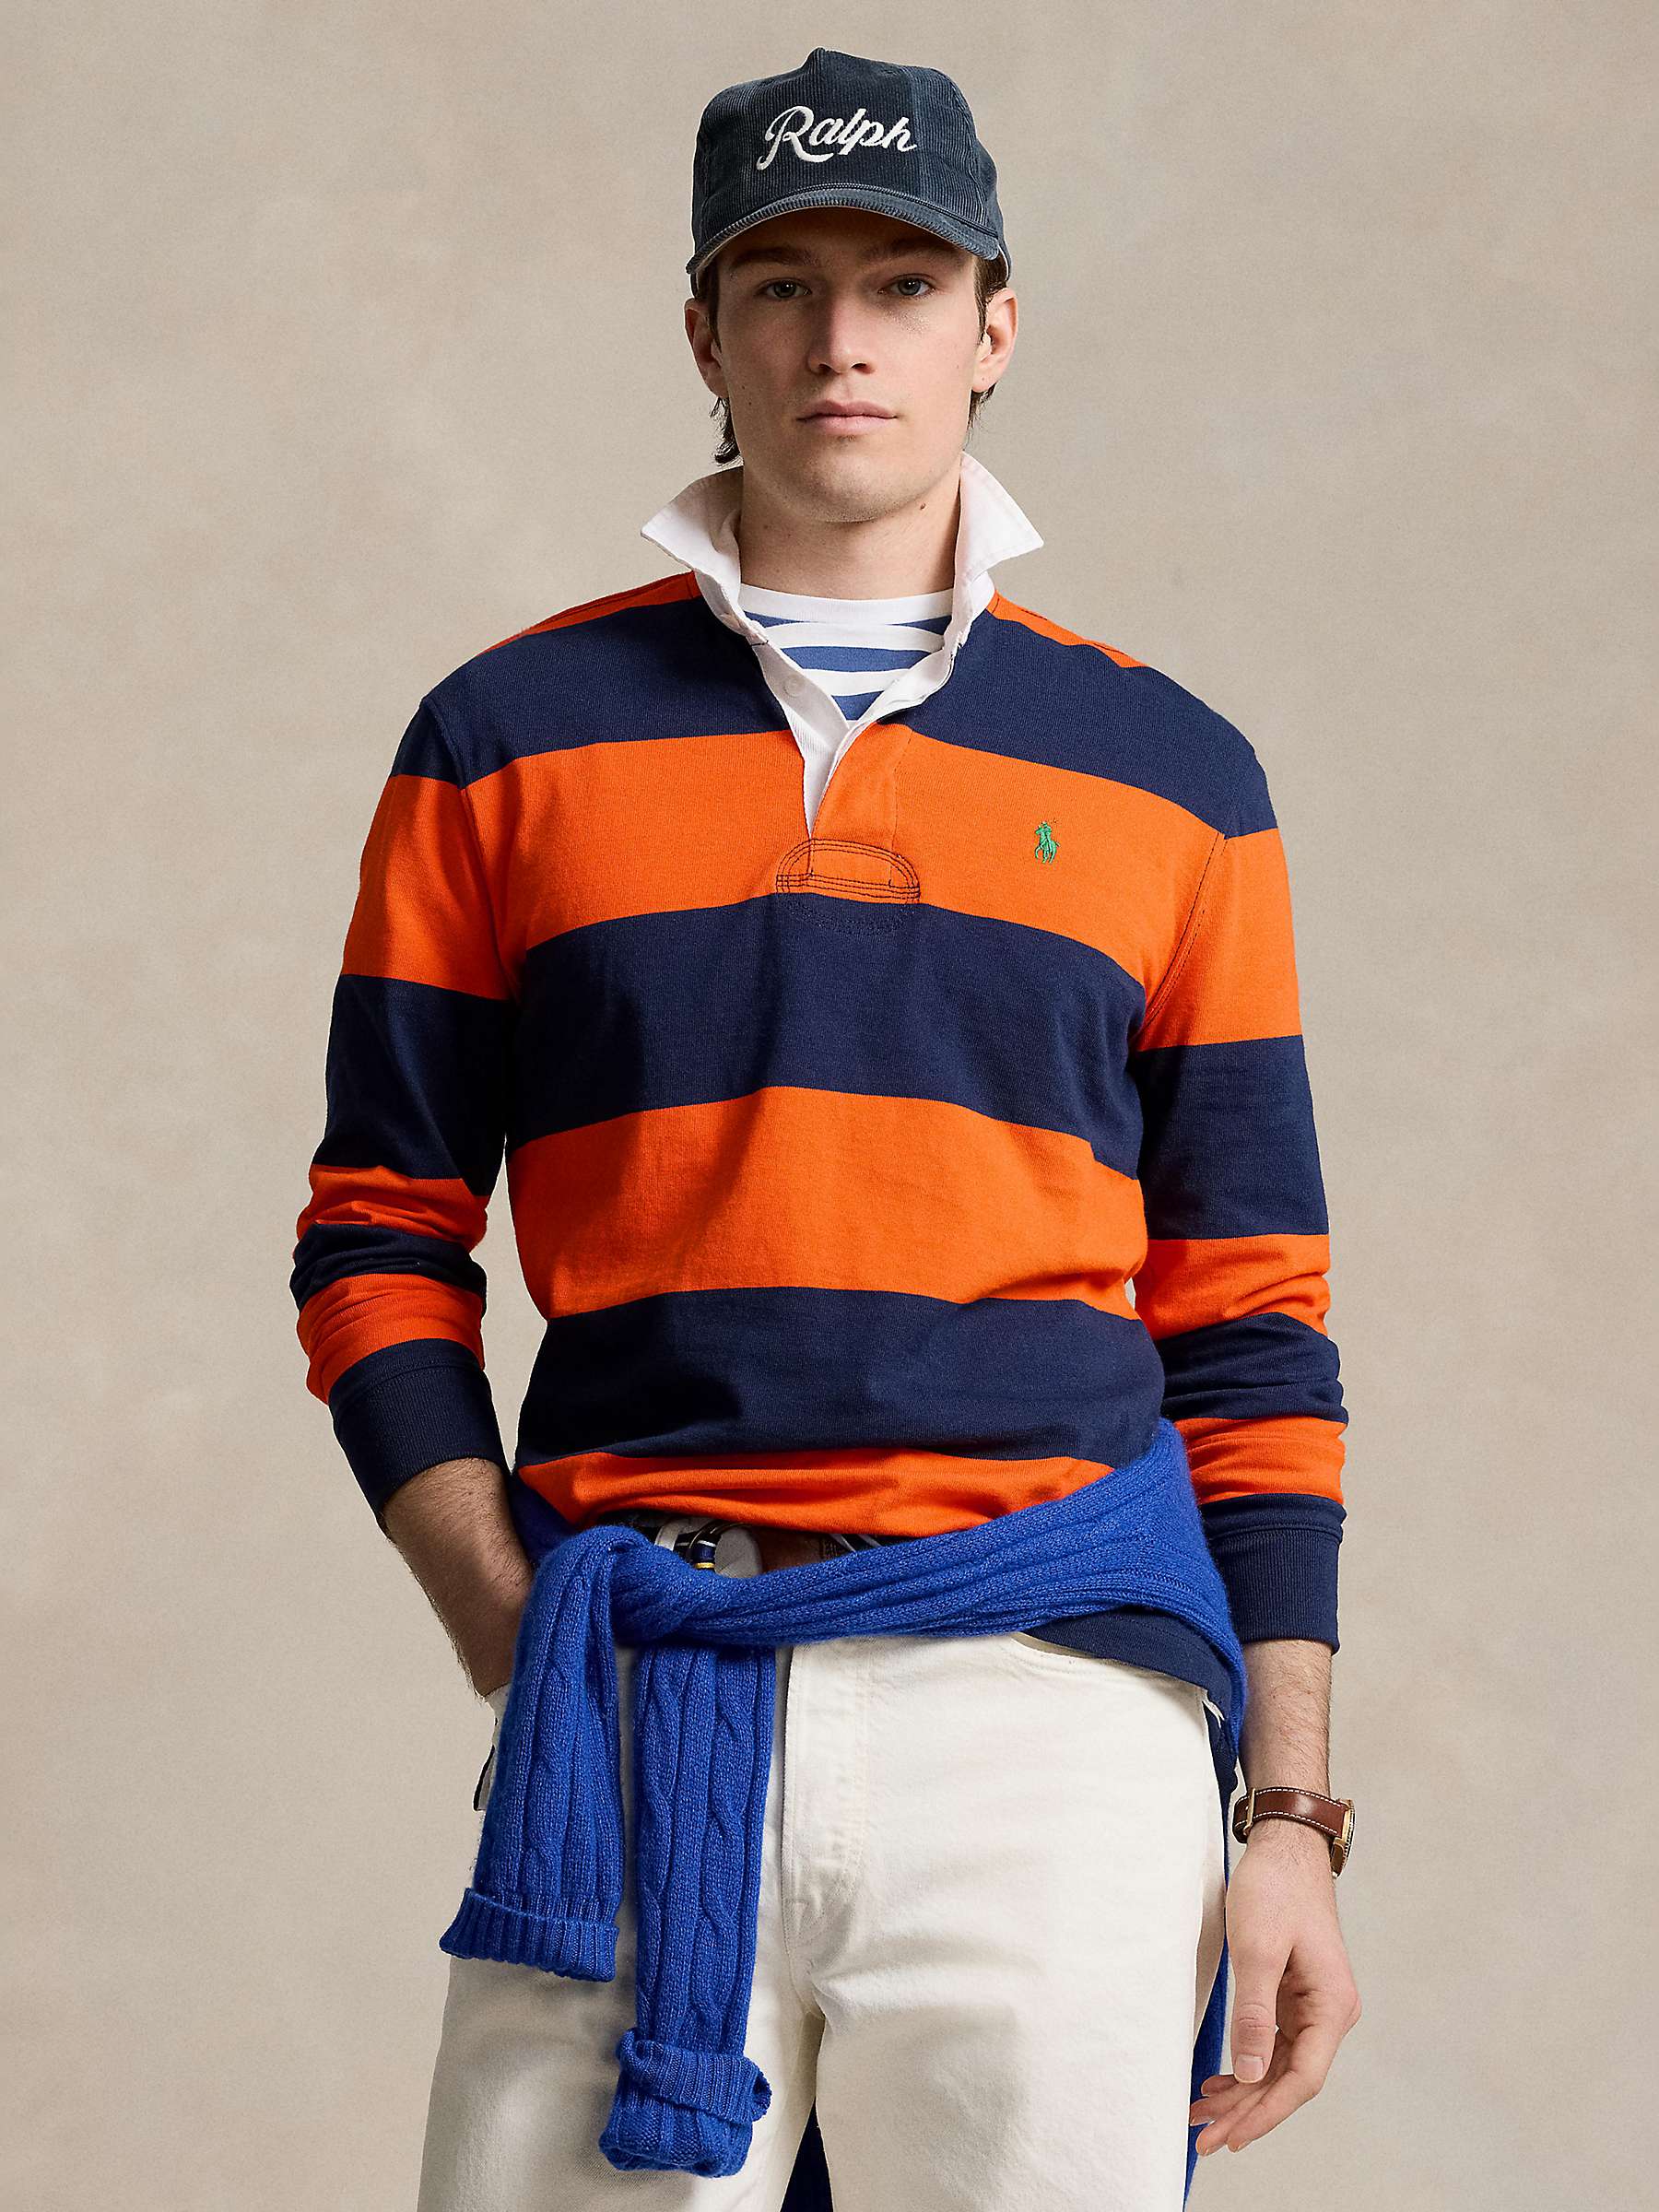 Buy Polo Ralph Lauren Classic Fit Striped Jersey Rugby Shirt Online at johnlewis.com